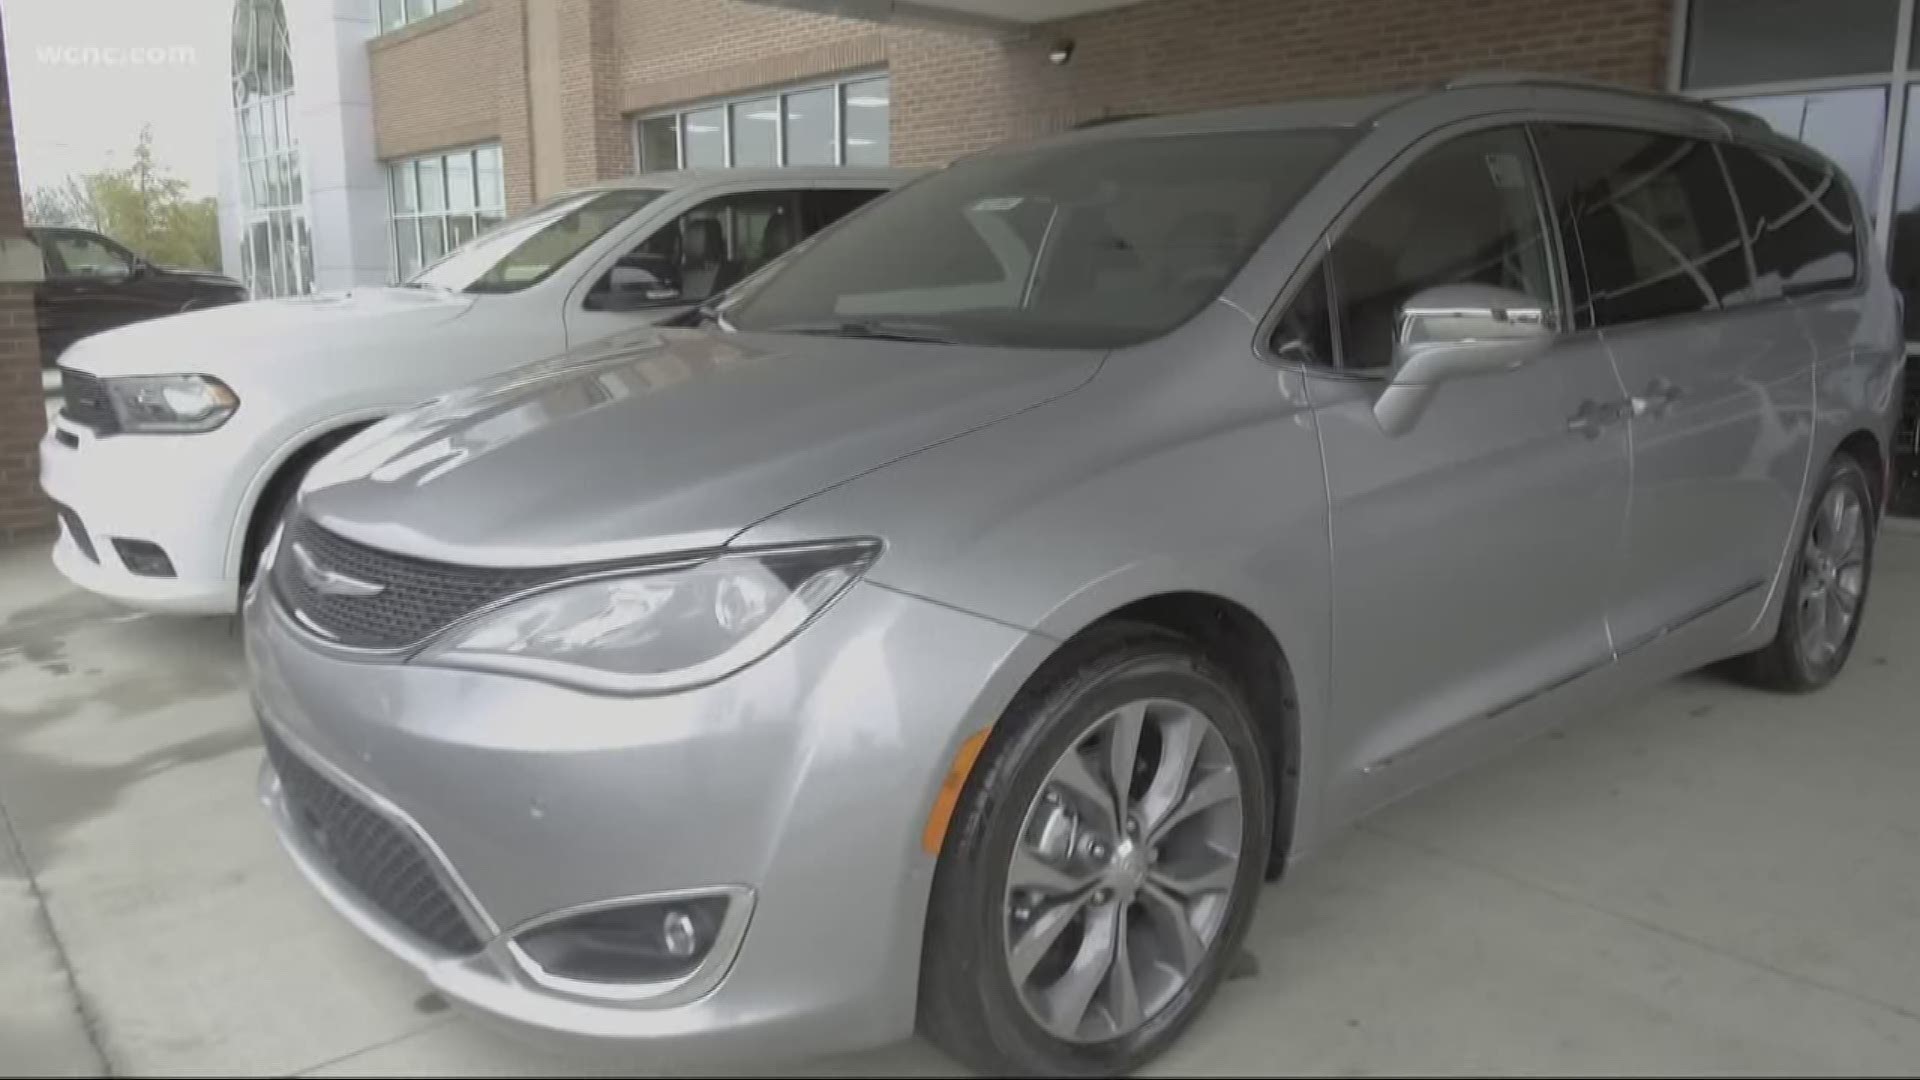 The 2019 Chrysler Pacifica combines the features of a minivan with a utility vehicle.